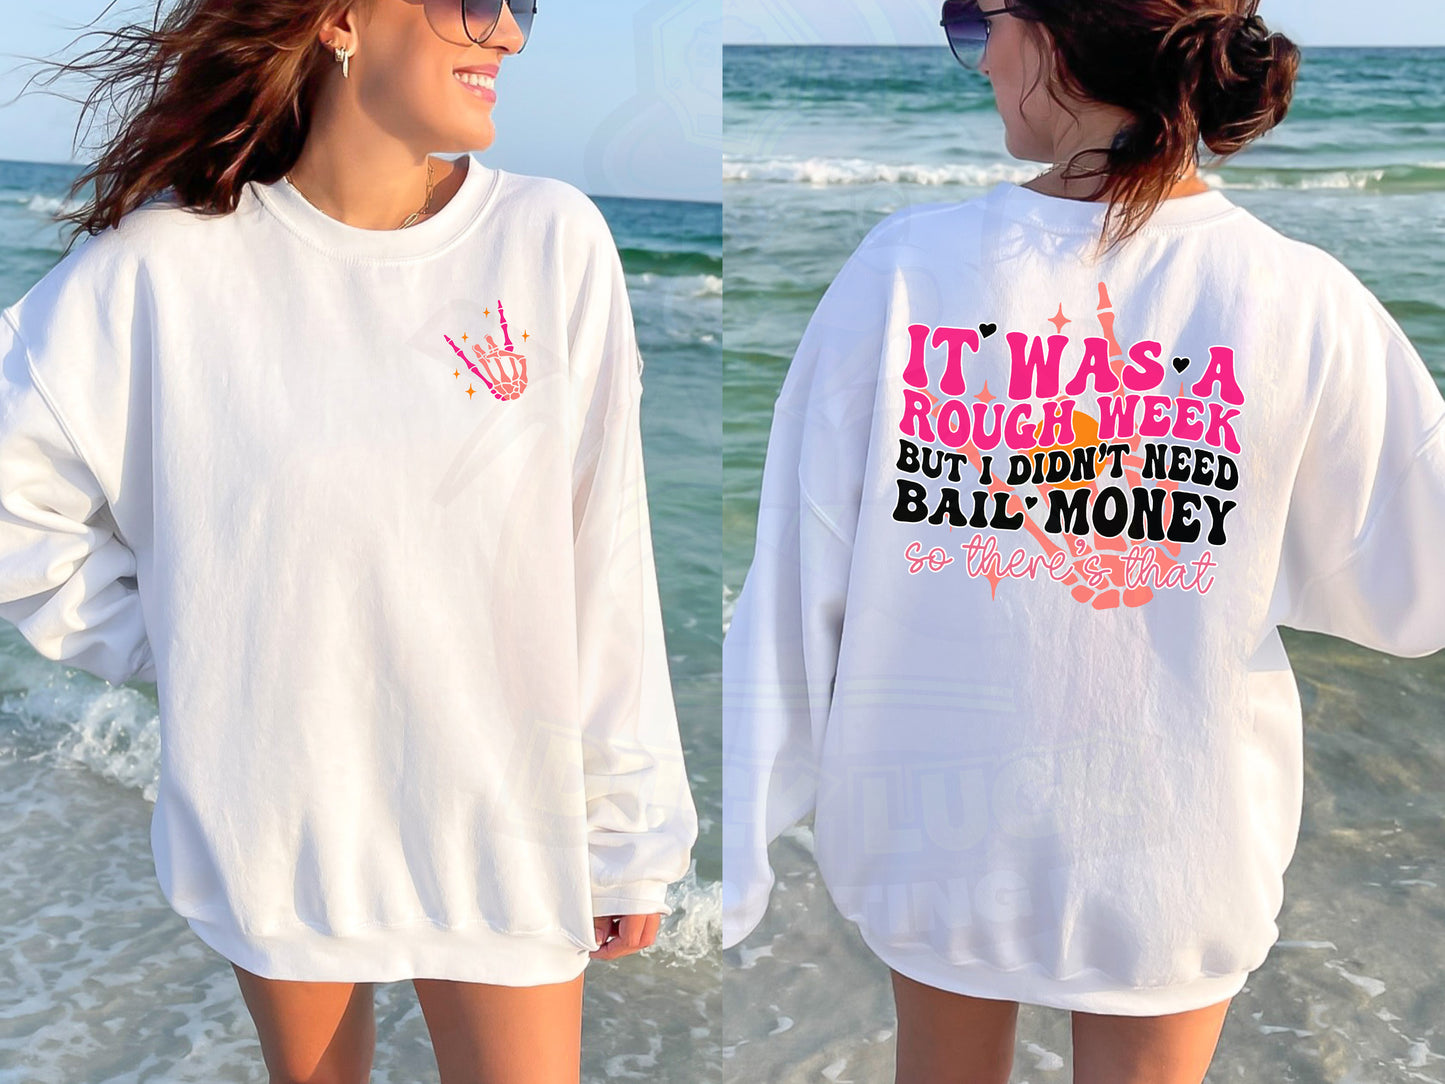 It was a rough week but I didn't need bail money_Shirt